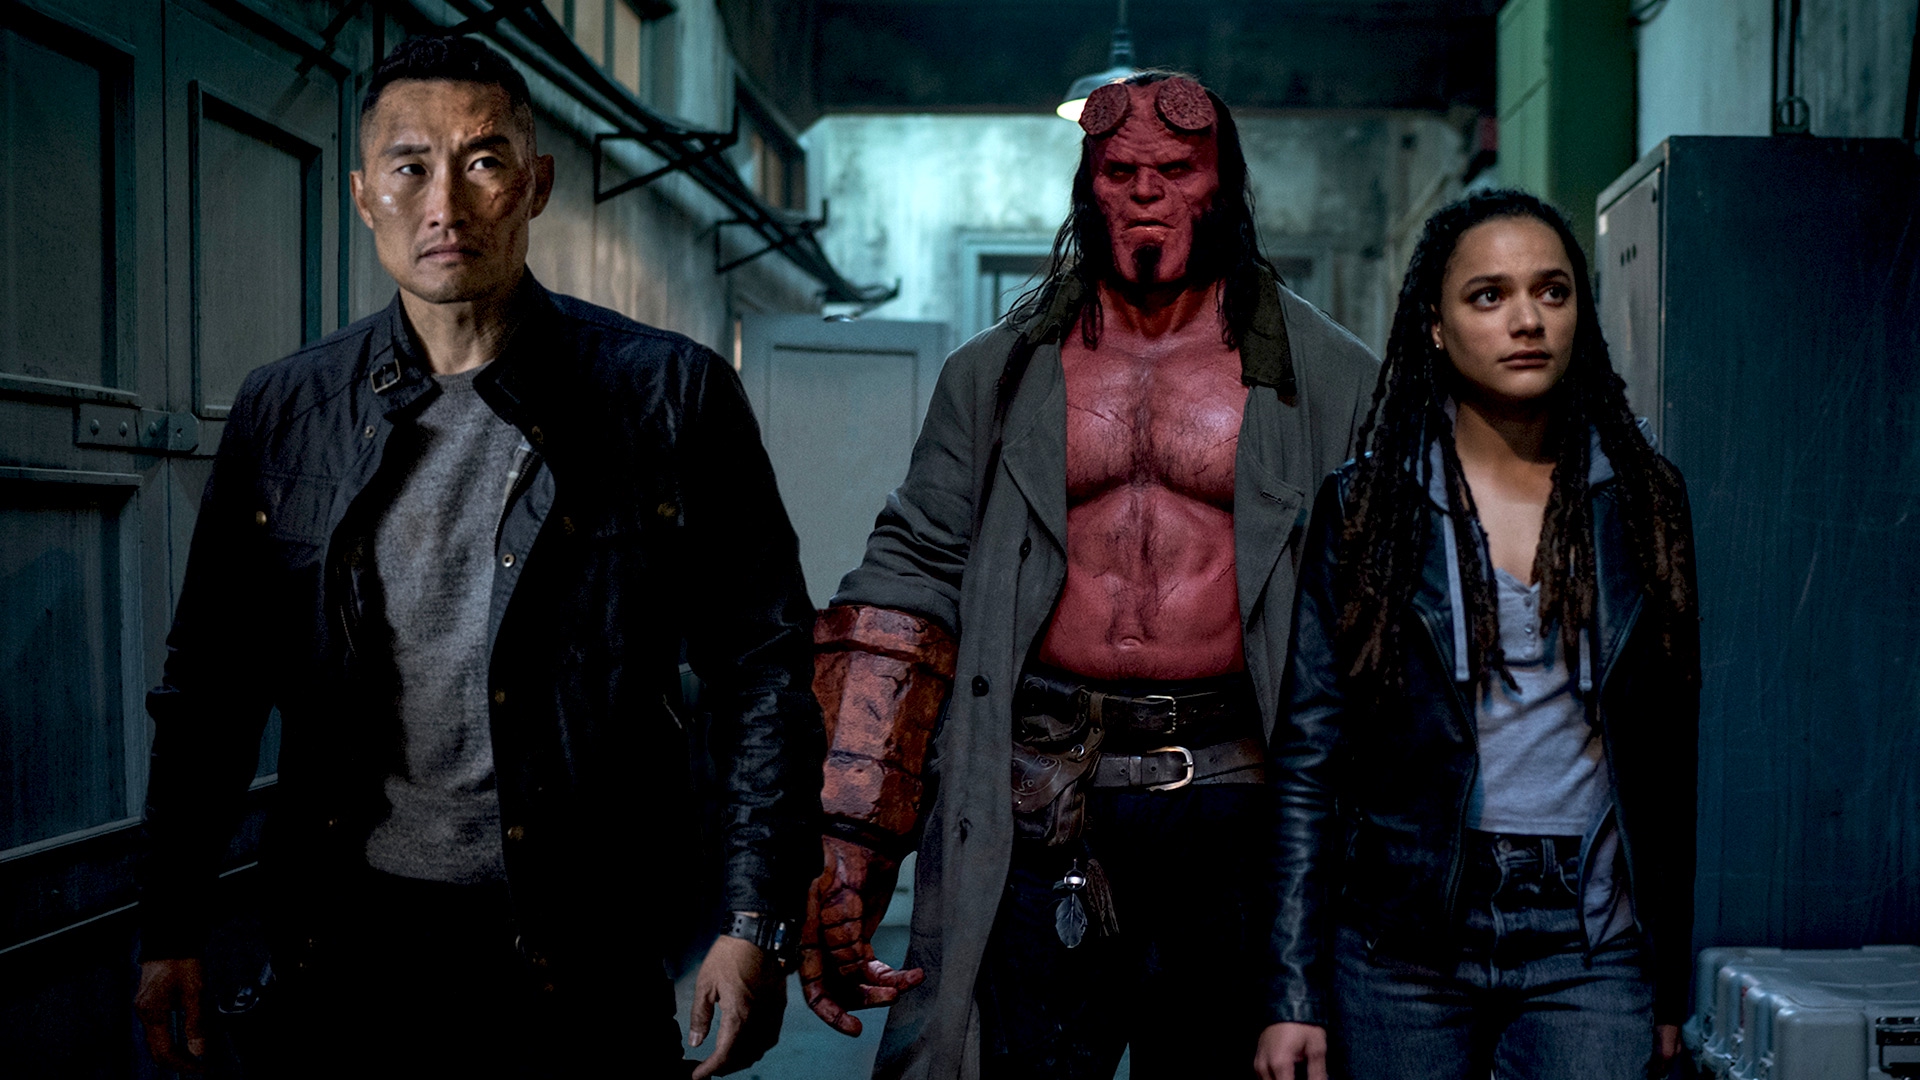 Friends that turned into enemies. Watch this epic fight scene from Hellboy,  in any language you want. Exclusively on Lionsgate… | Instagram